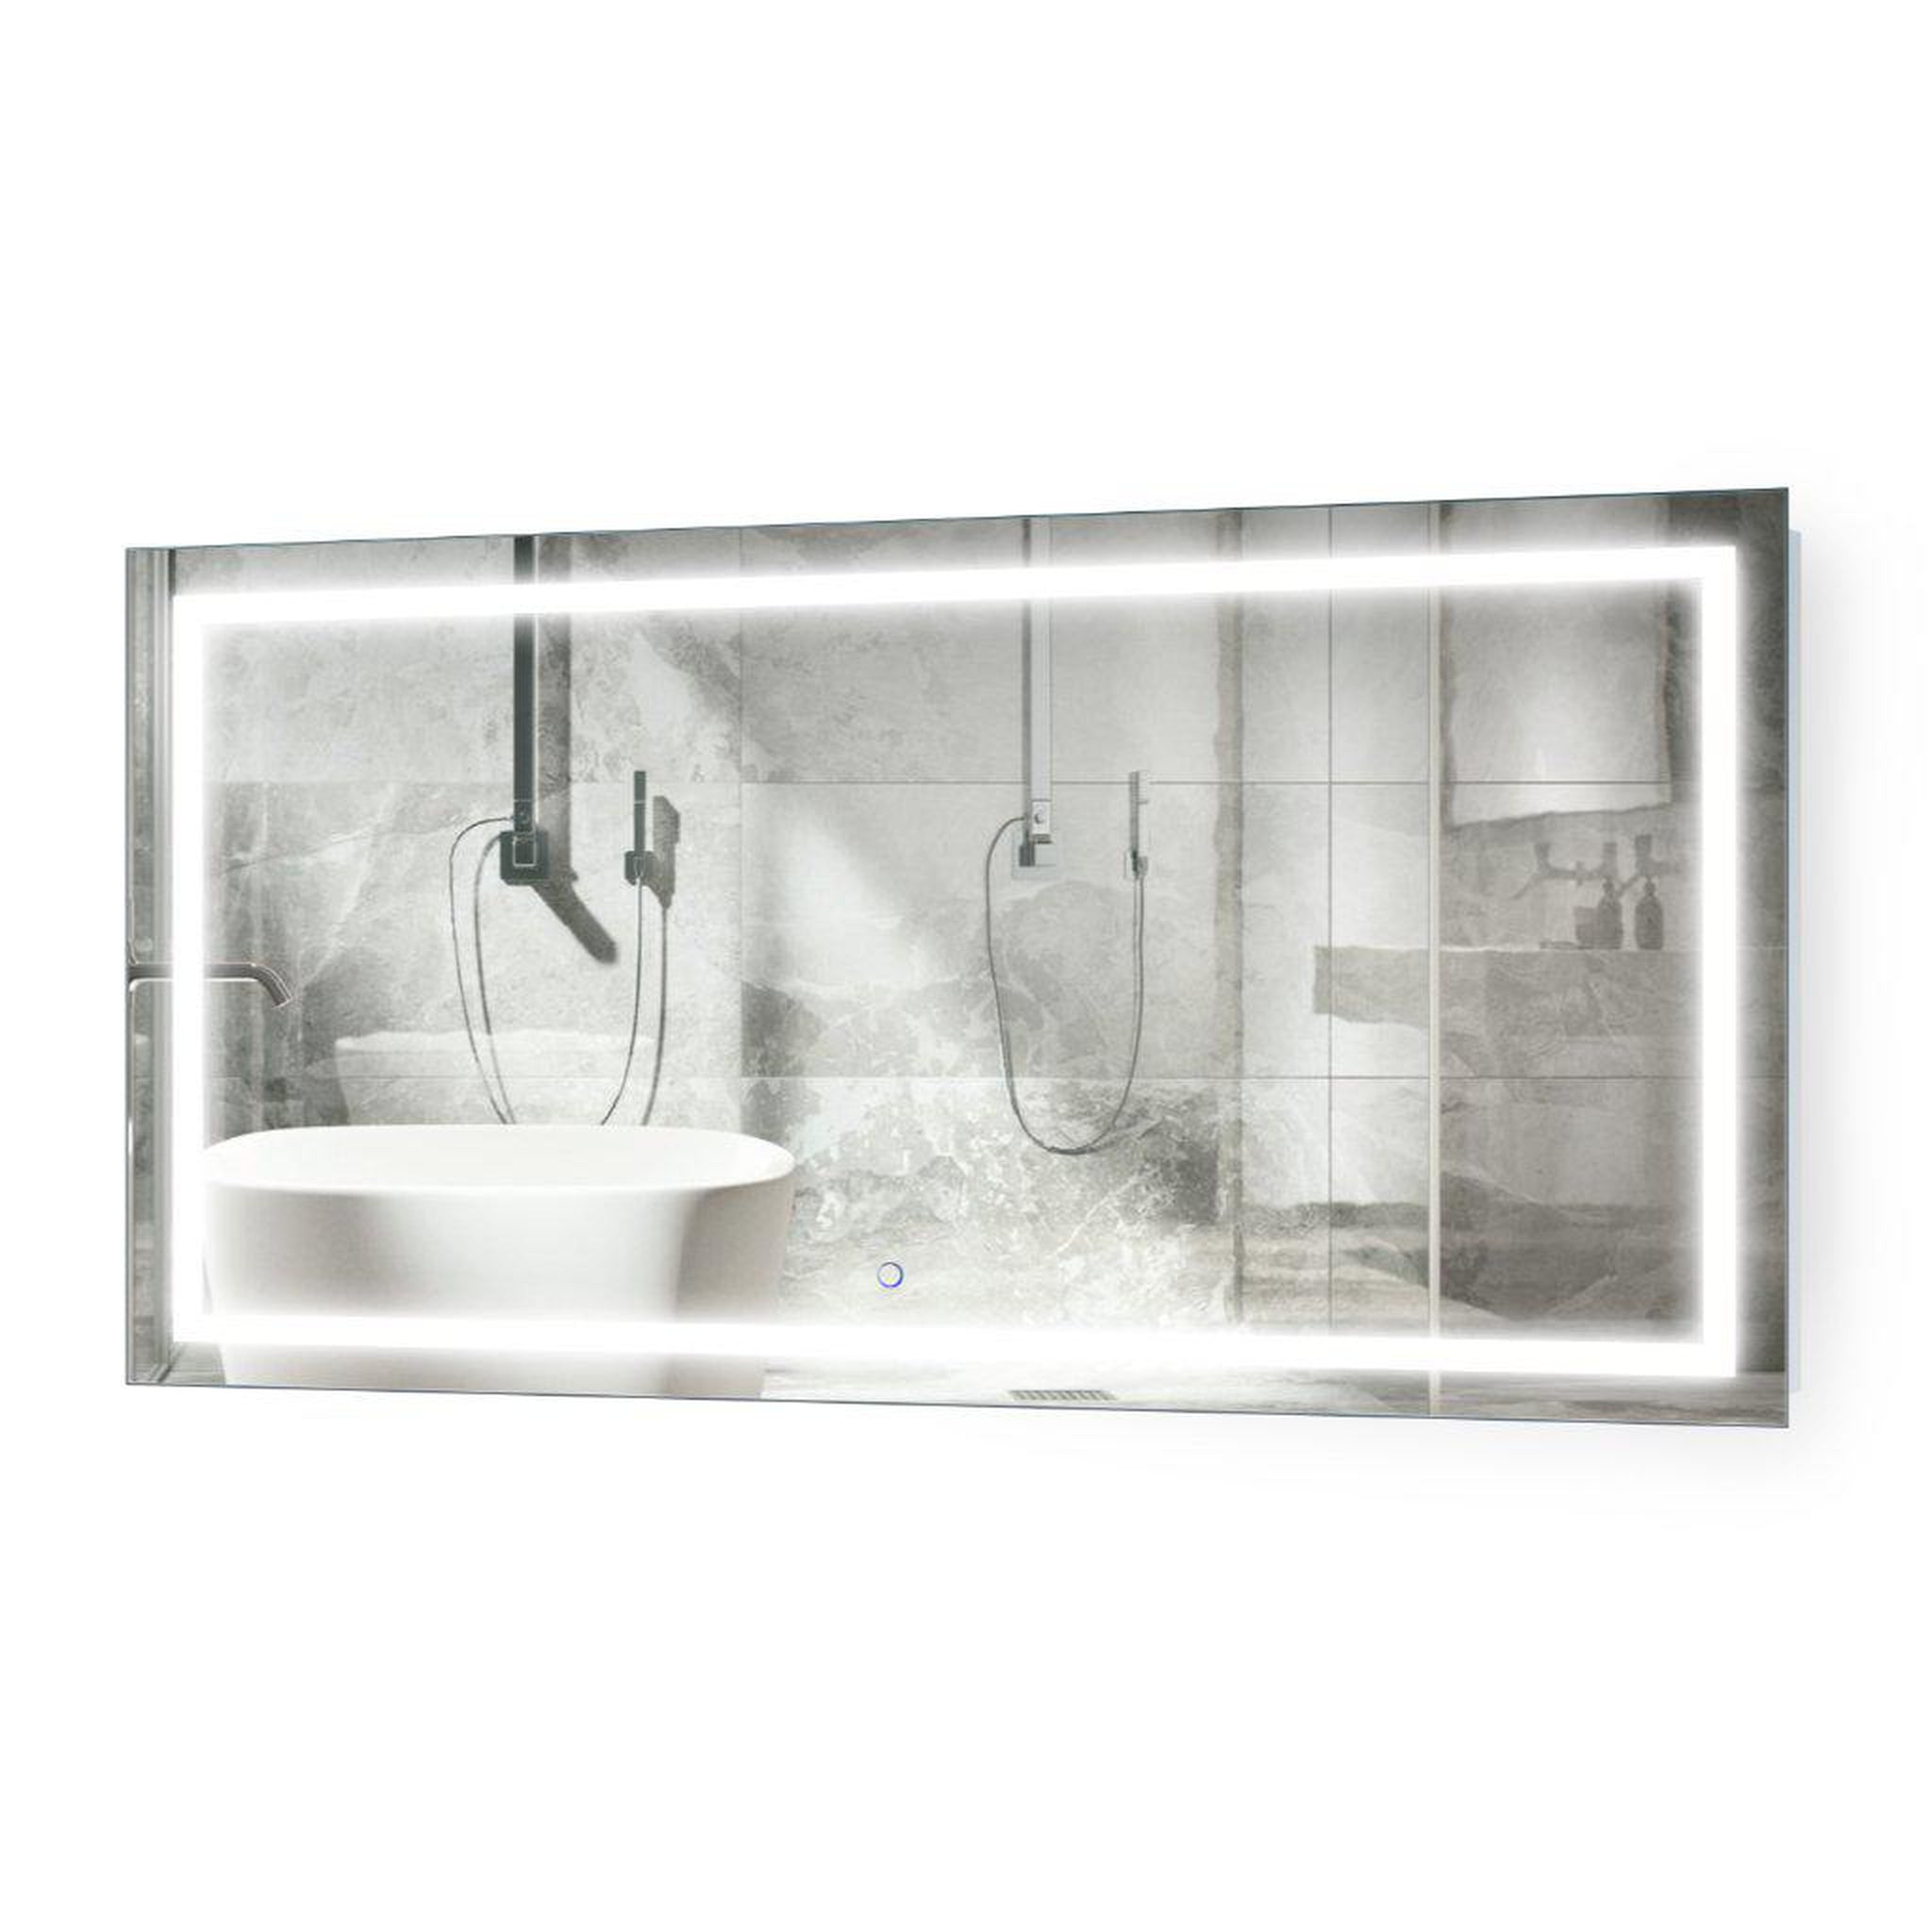 Krugg Reflections, Krugg Reflections Icon 54" x 24" 5000K Rectangular Wall-Mounted Illuminated Silver Backed LED Mirror With Built-in Defogger and Touch Sensor On/Off Built-in Dimmer